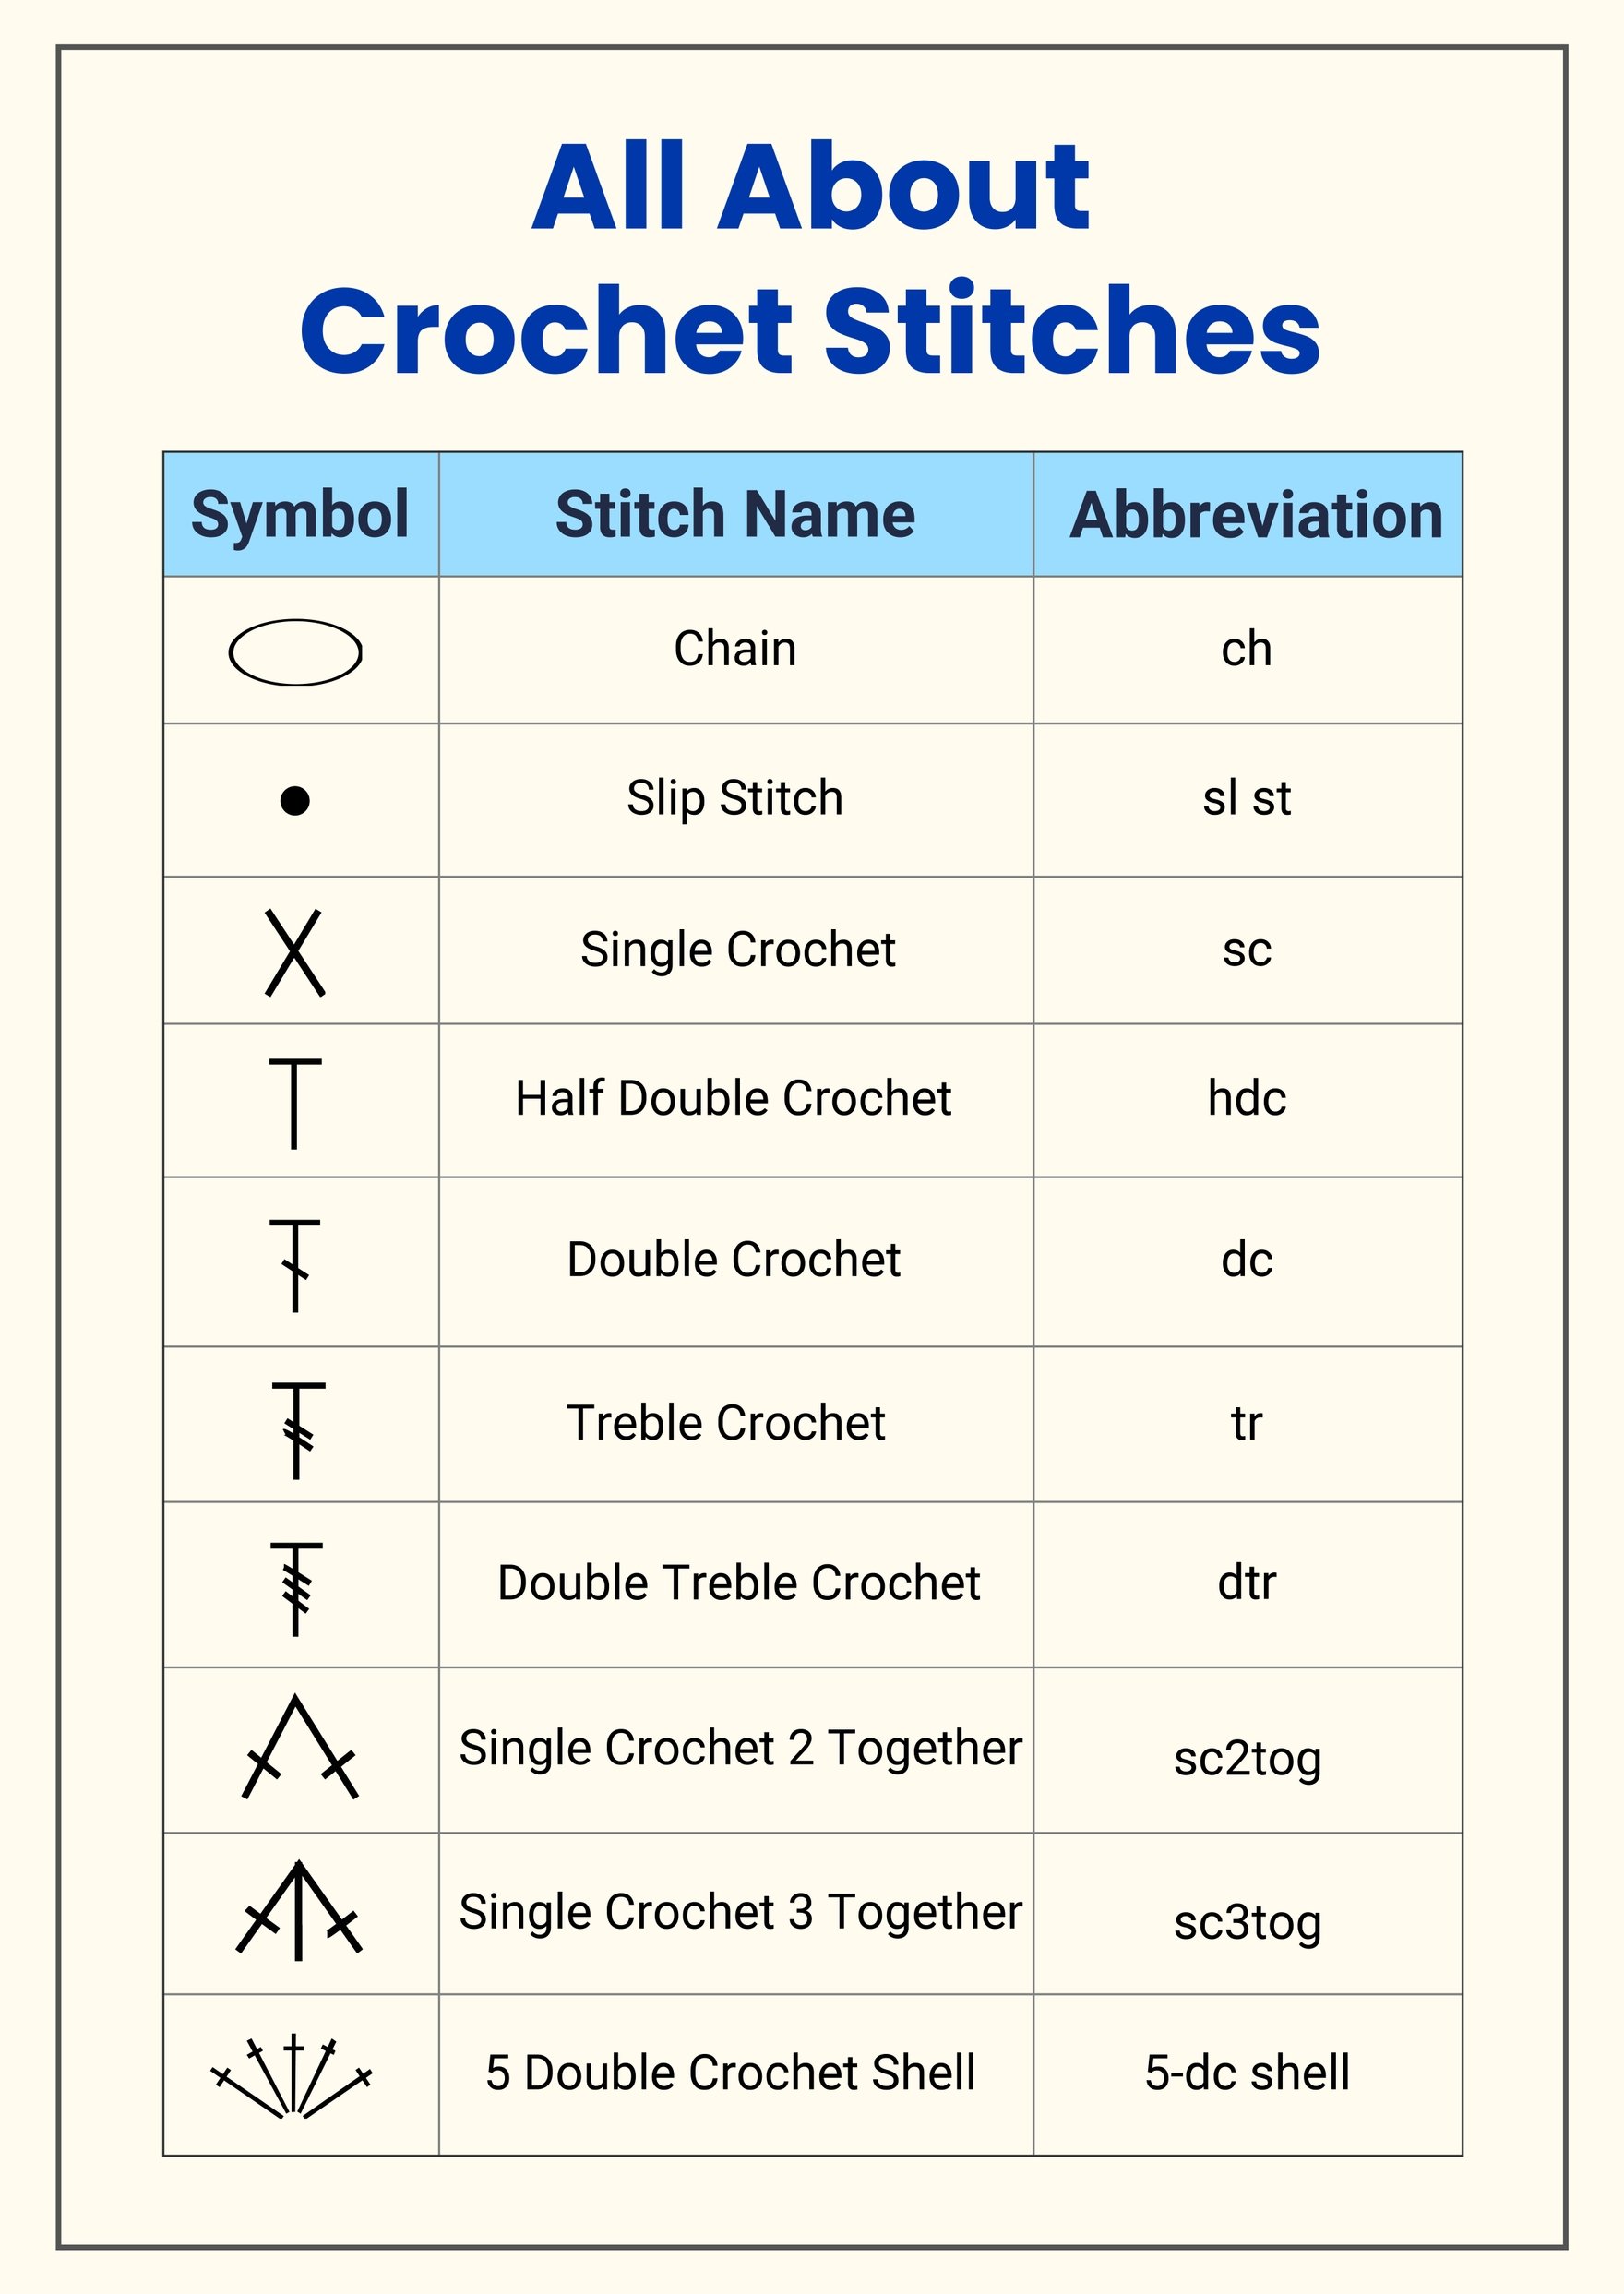 All About Crochet Reference Chart in PDF, Illustrator